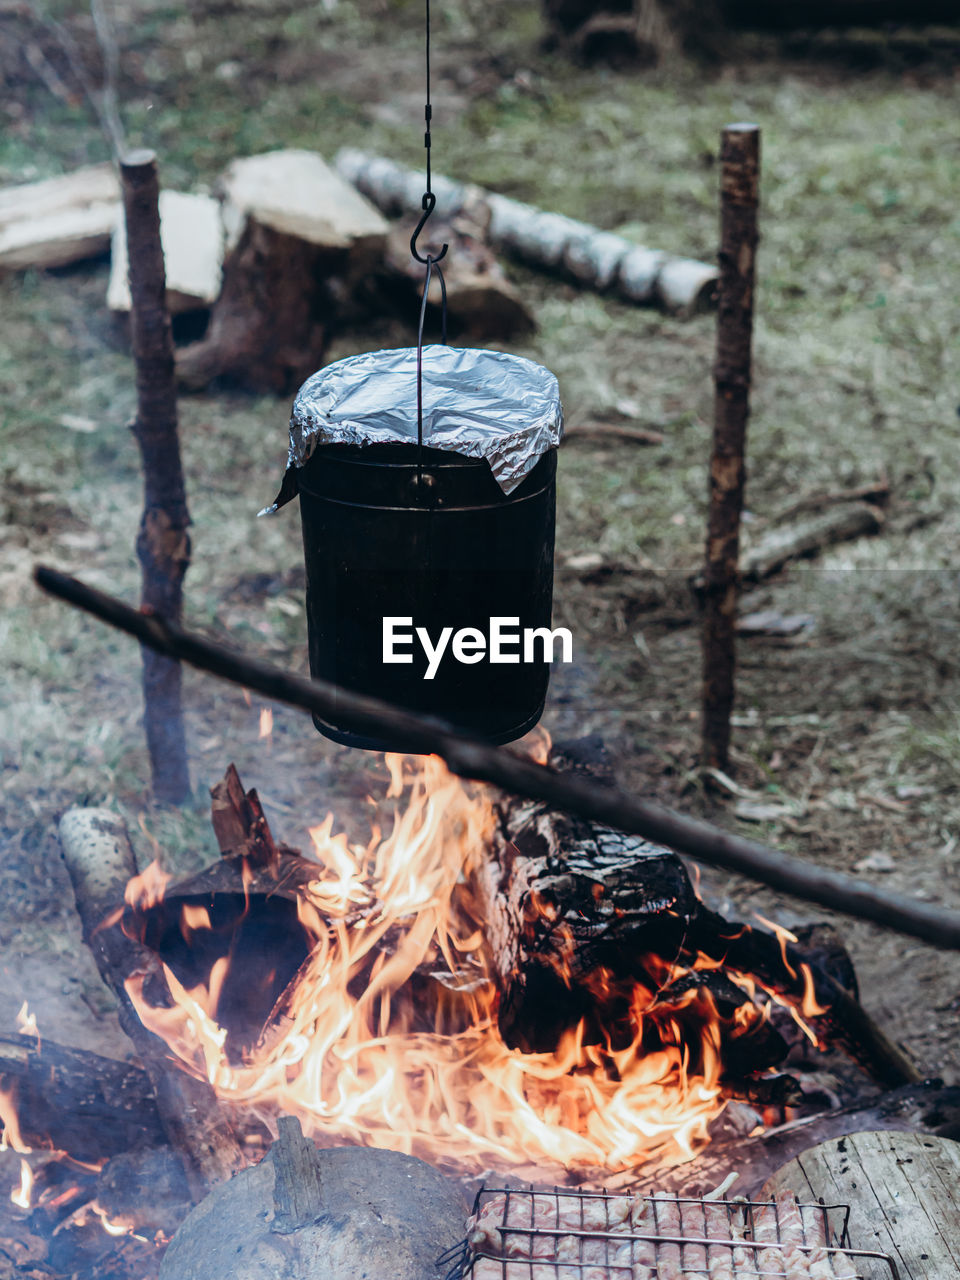 The kettle hangs over the fire. cooking at the campsite. camping detail, travel lifestyle photo.